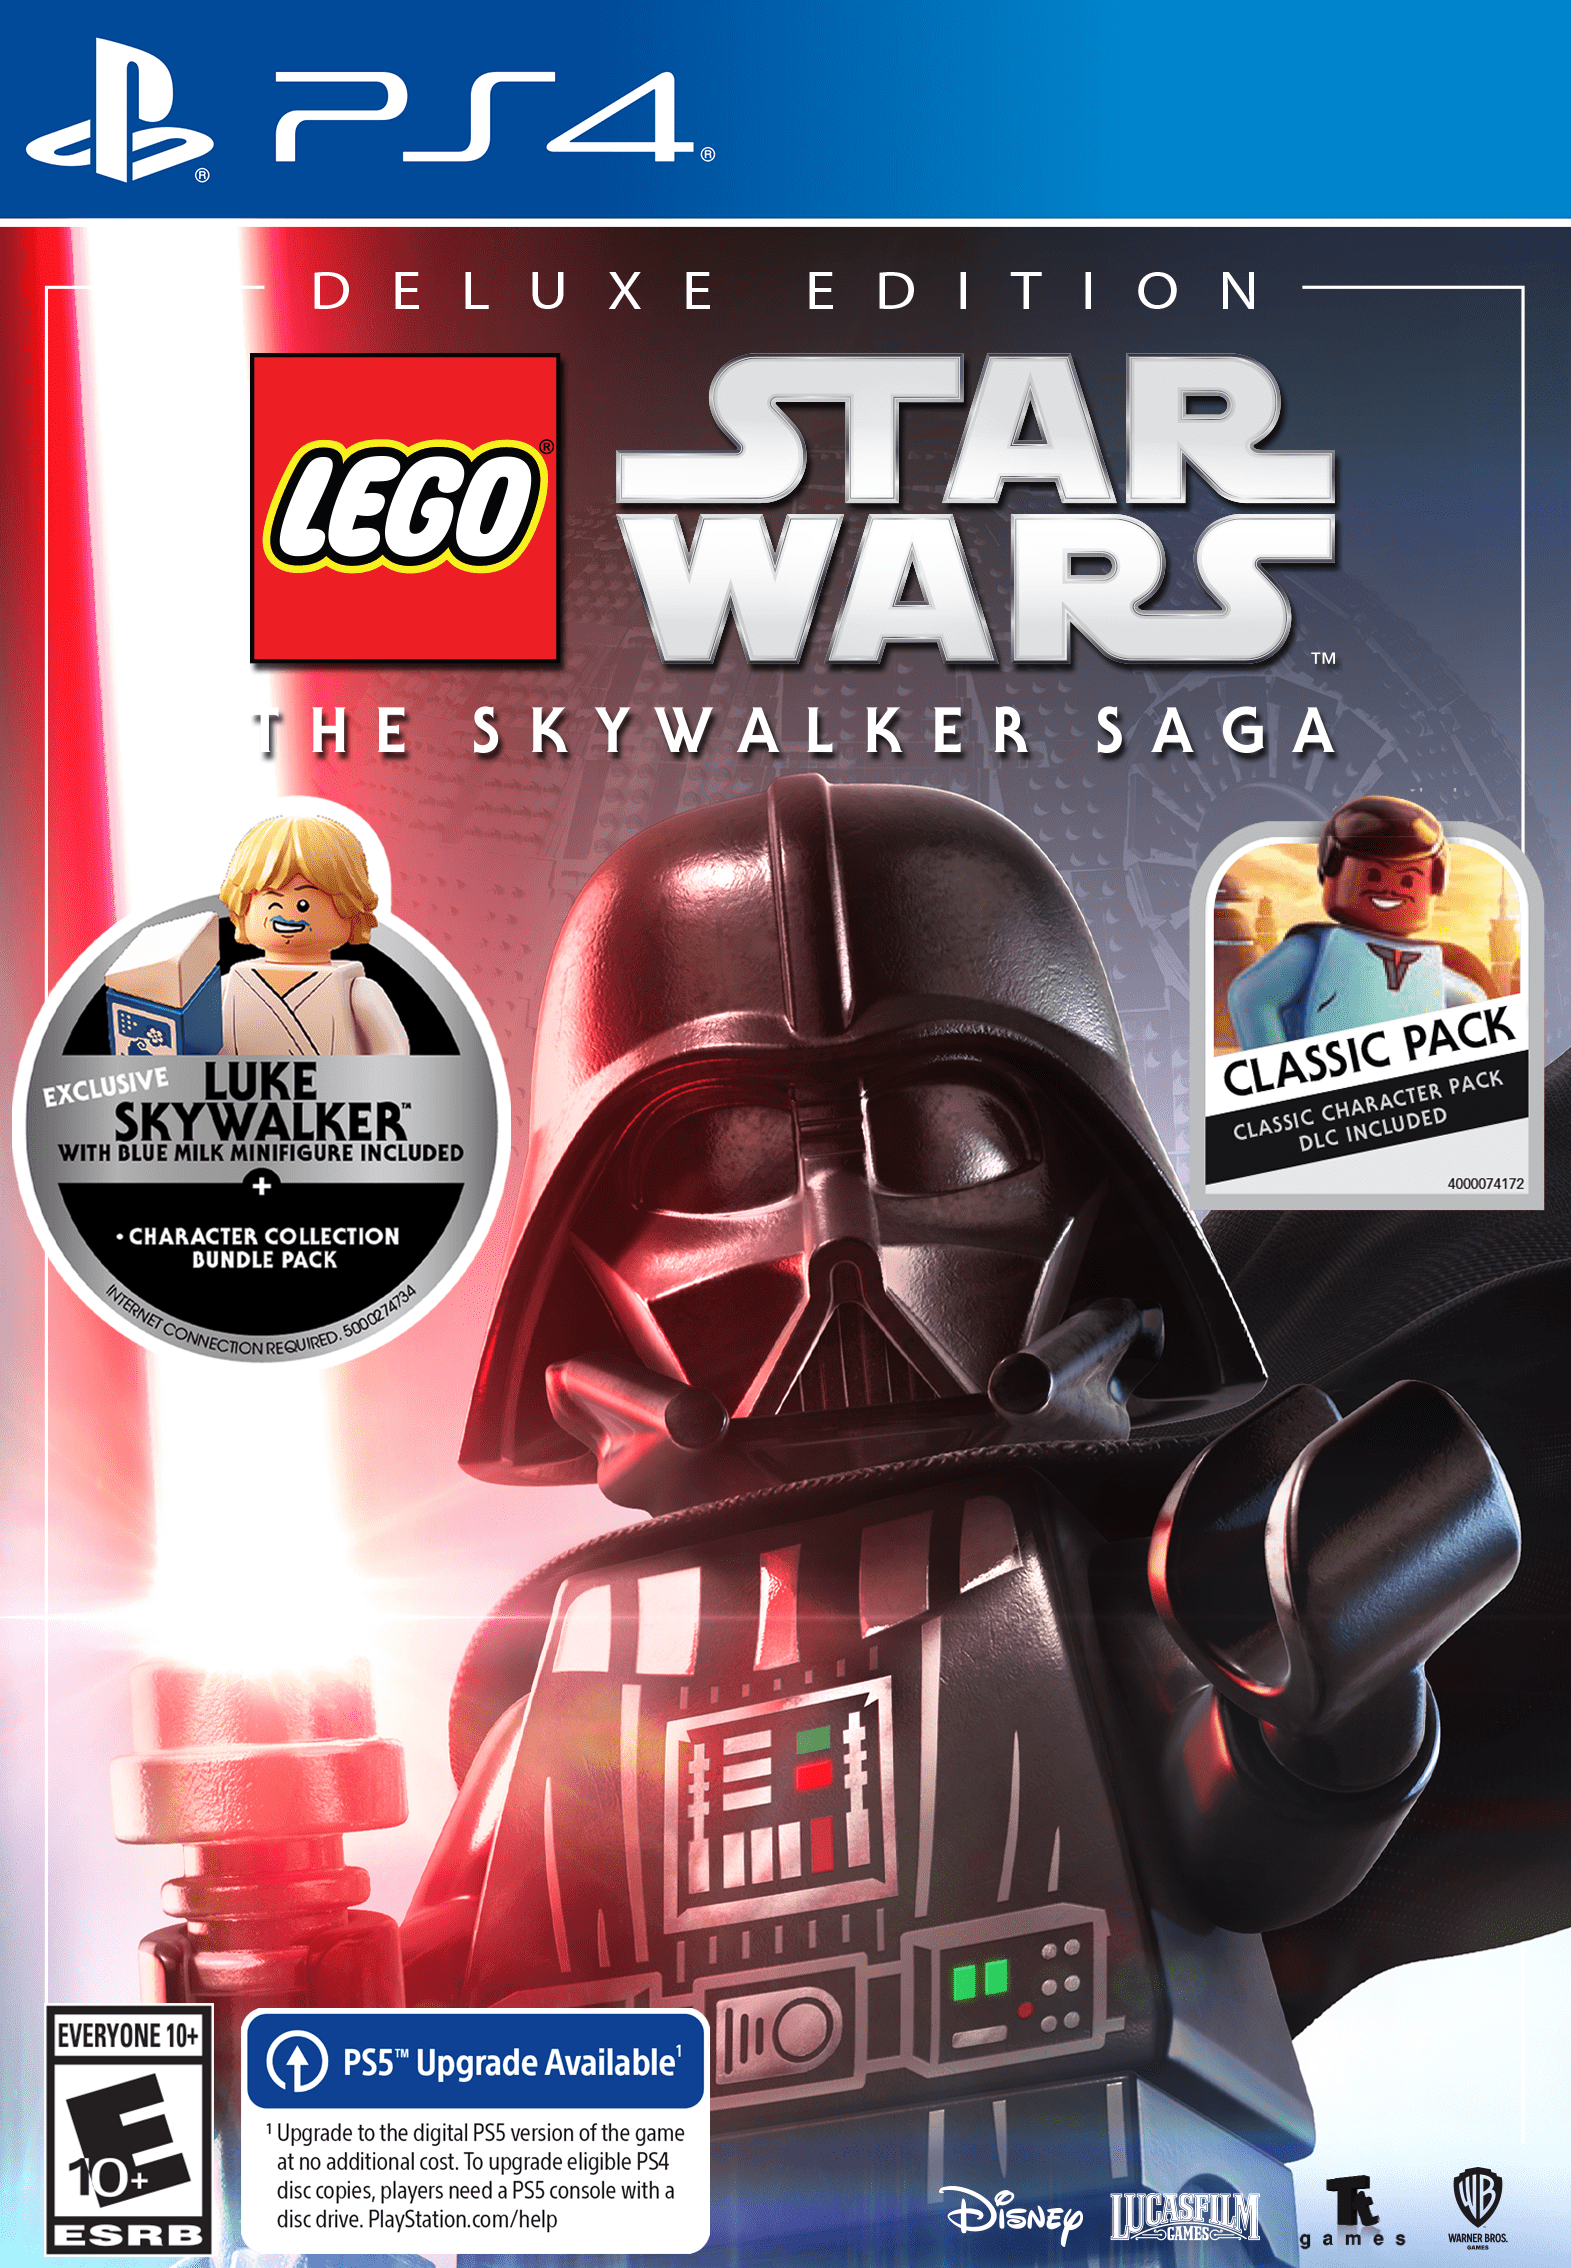 LEGO Star Wars: The Skywalker Saga (Deluxe Edition) - For PlayStation 4